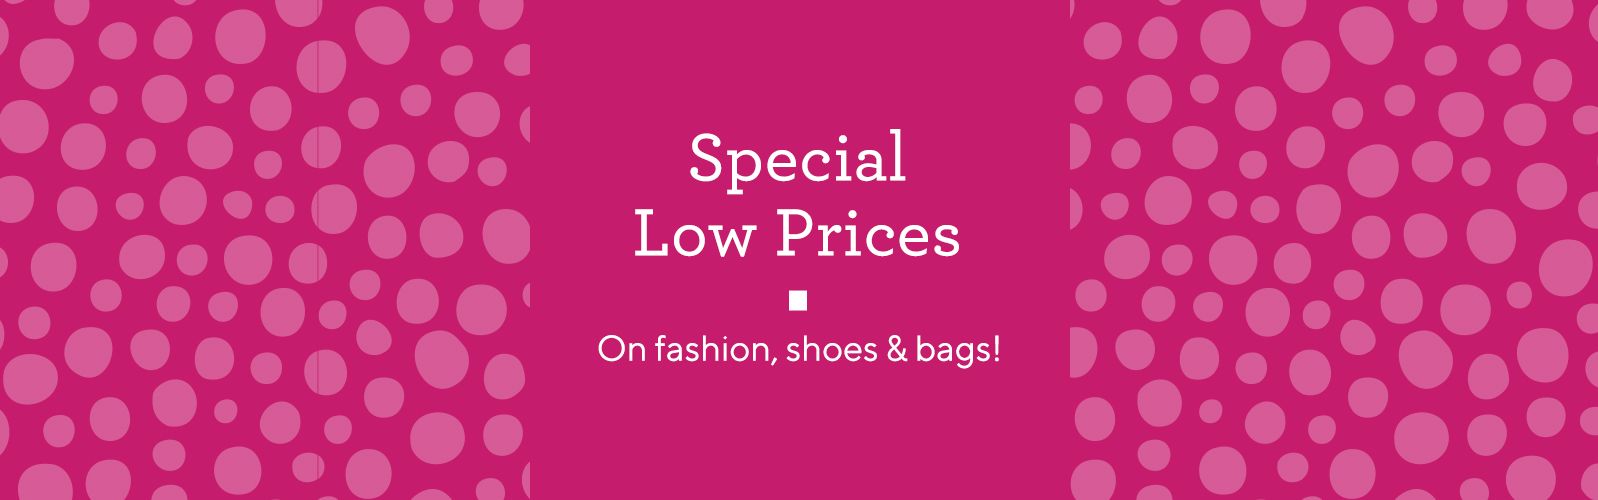 Special Low Prices  On fashion, shoes & bags!